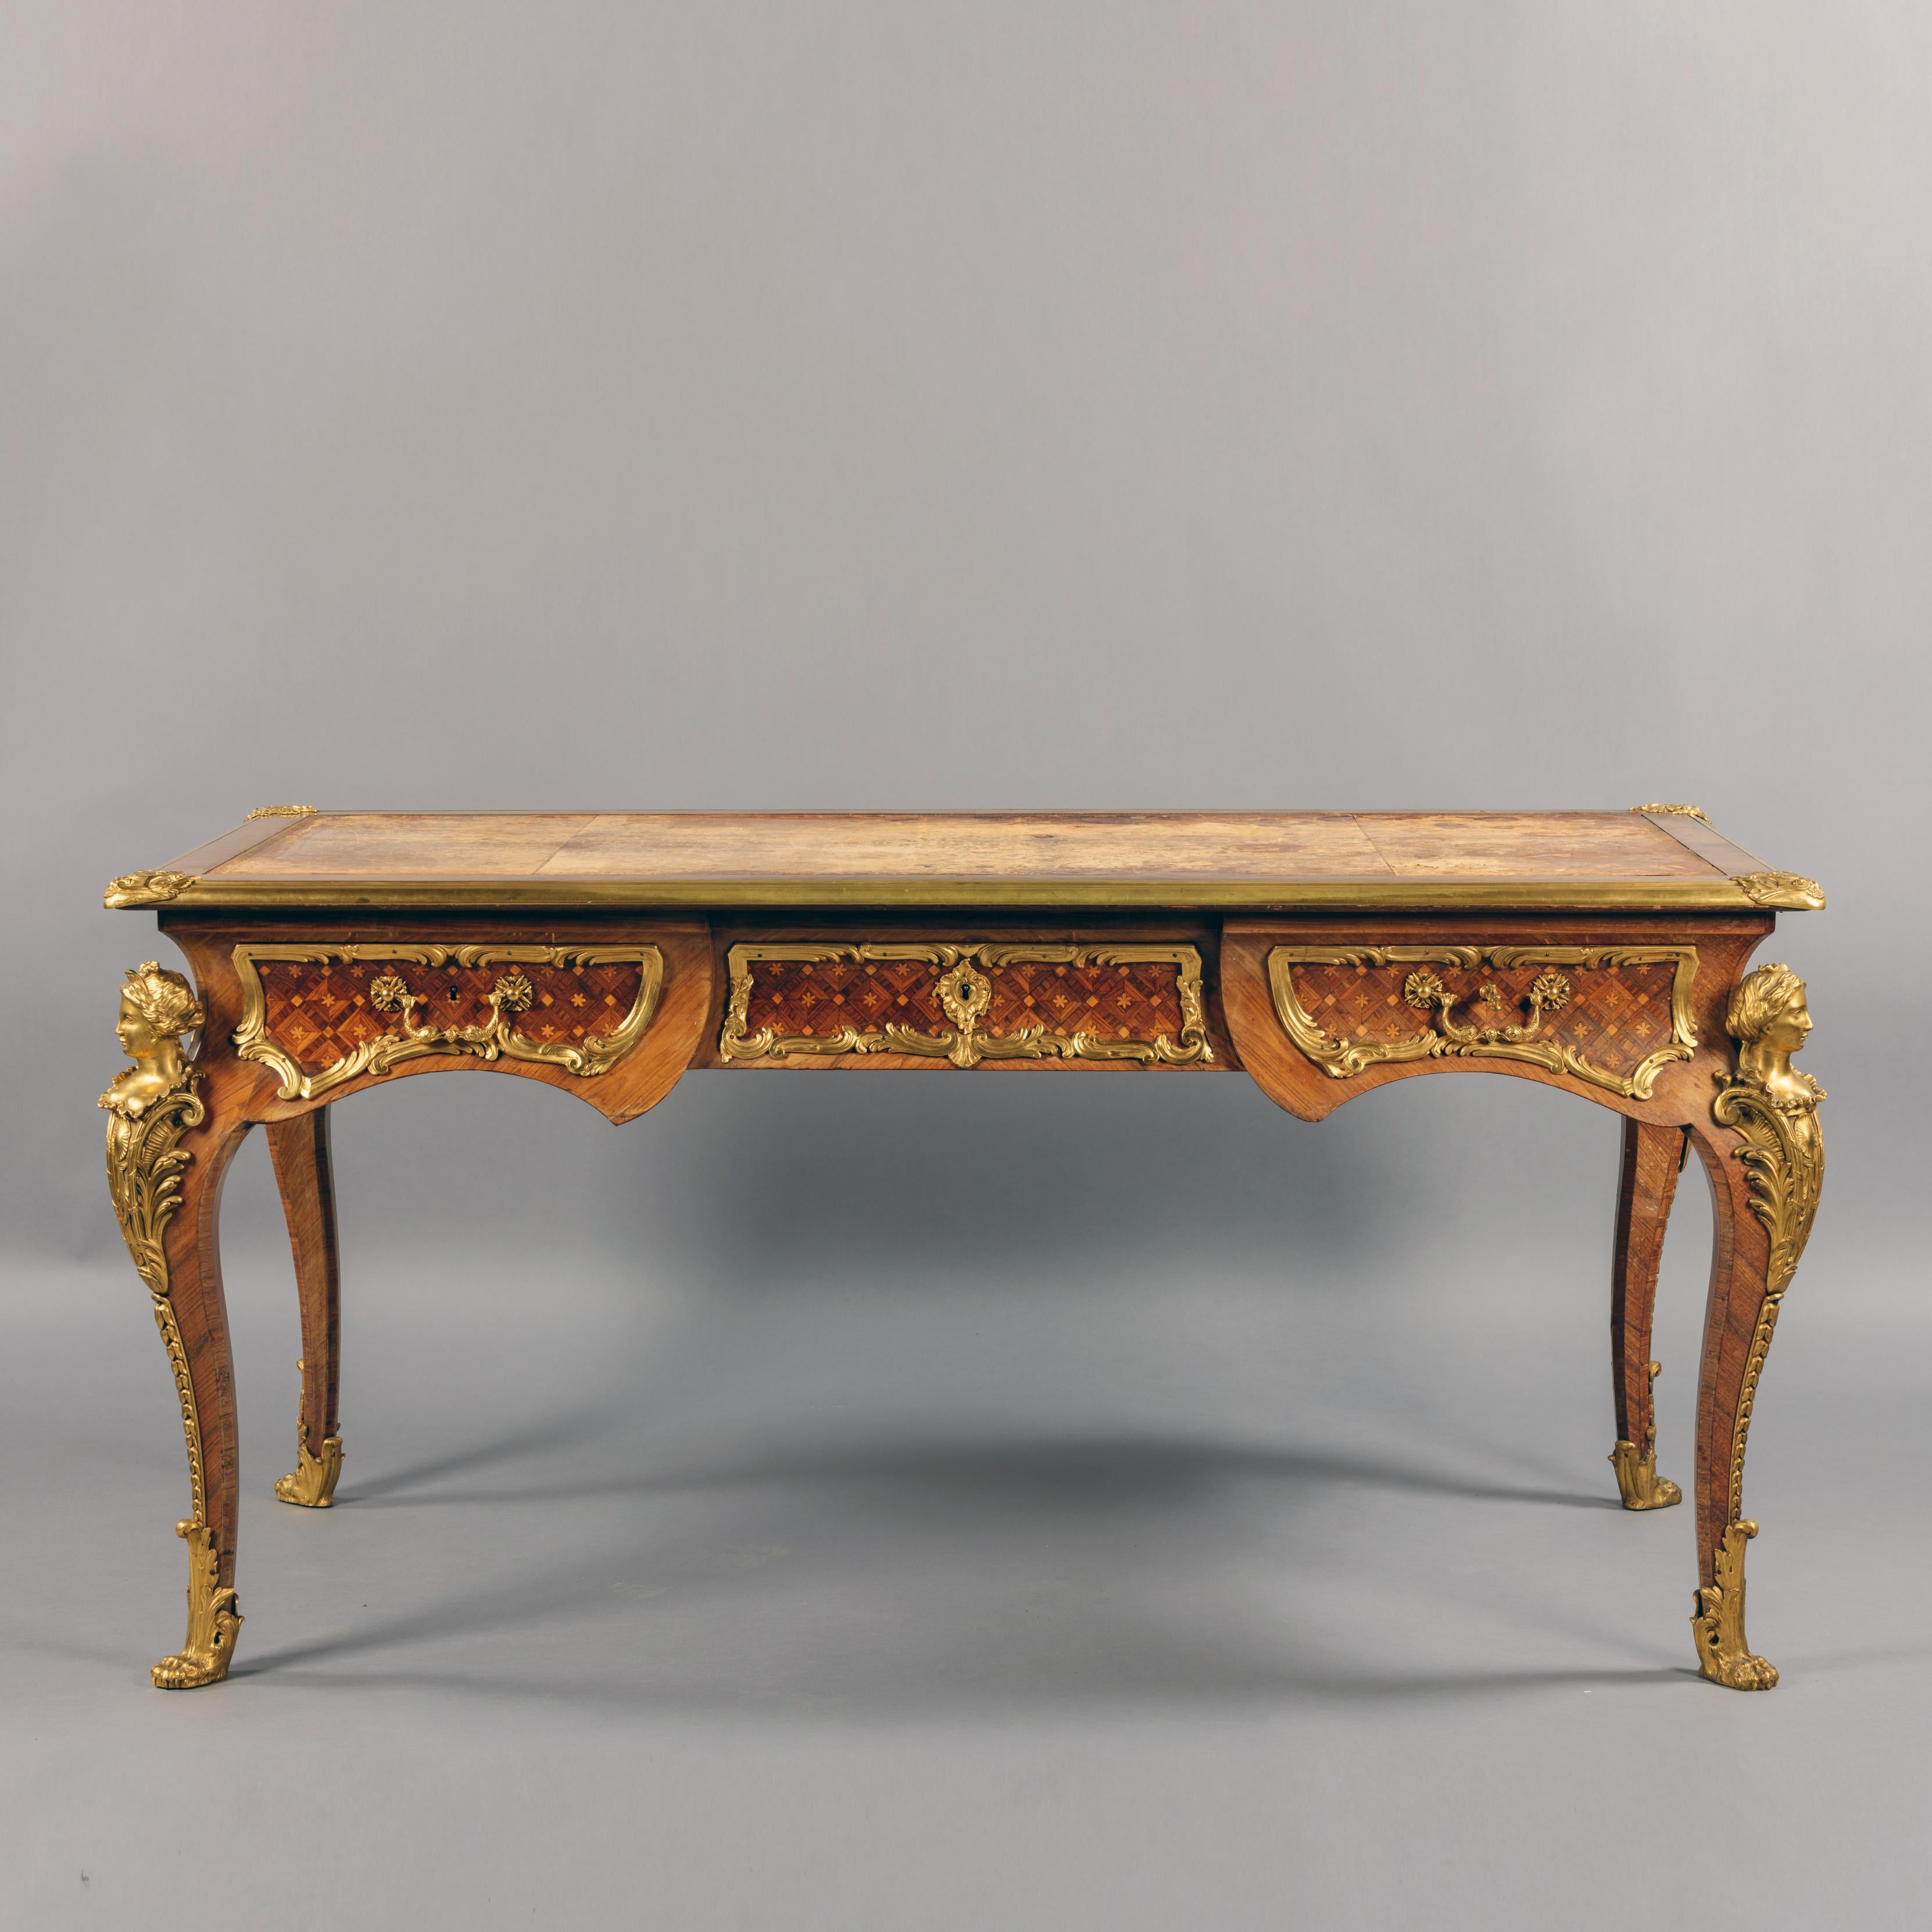 A fine Regence style gilt-bronze mounted parquetry bureau plat, in the manner of Charles Cressent.

This fine parquetry inlaid bureau plat has a tooled leather top and sumptuous gilt-bronze mounts.

The desk has a shaped frieze fitted with three